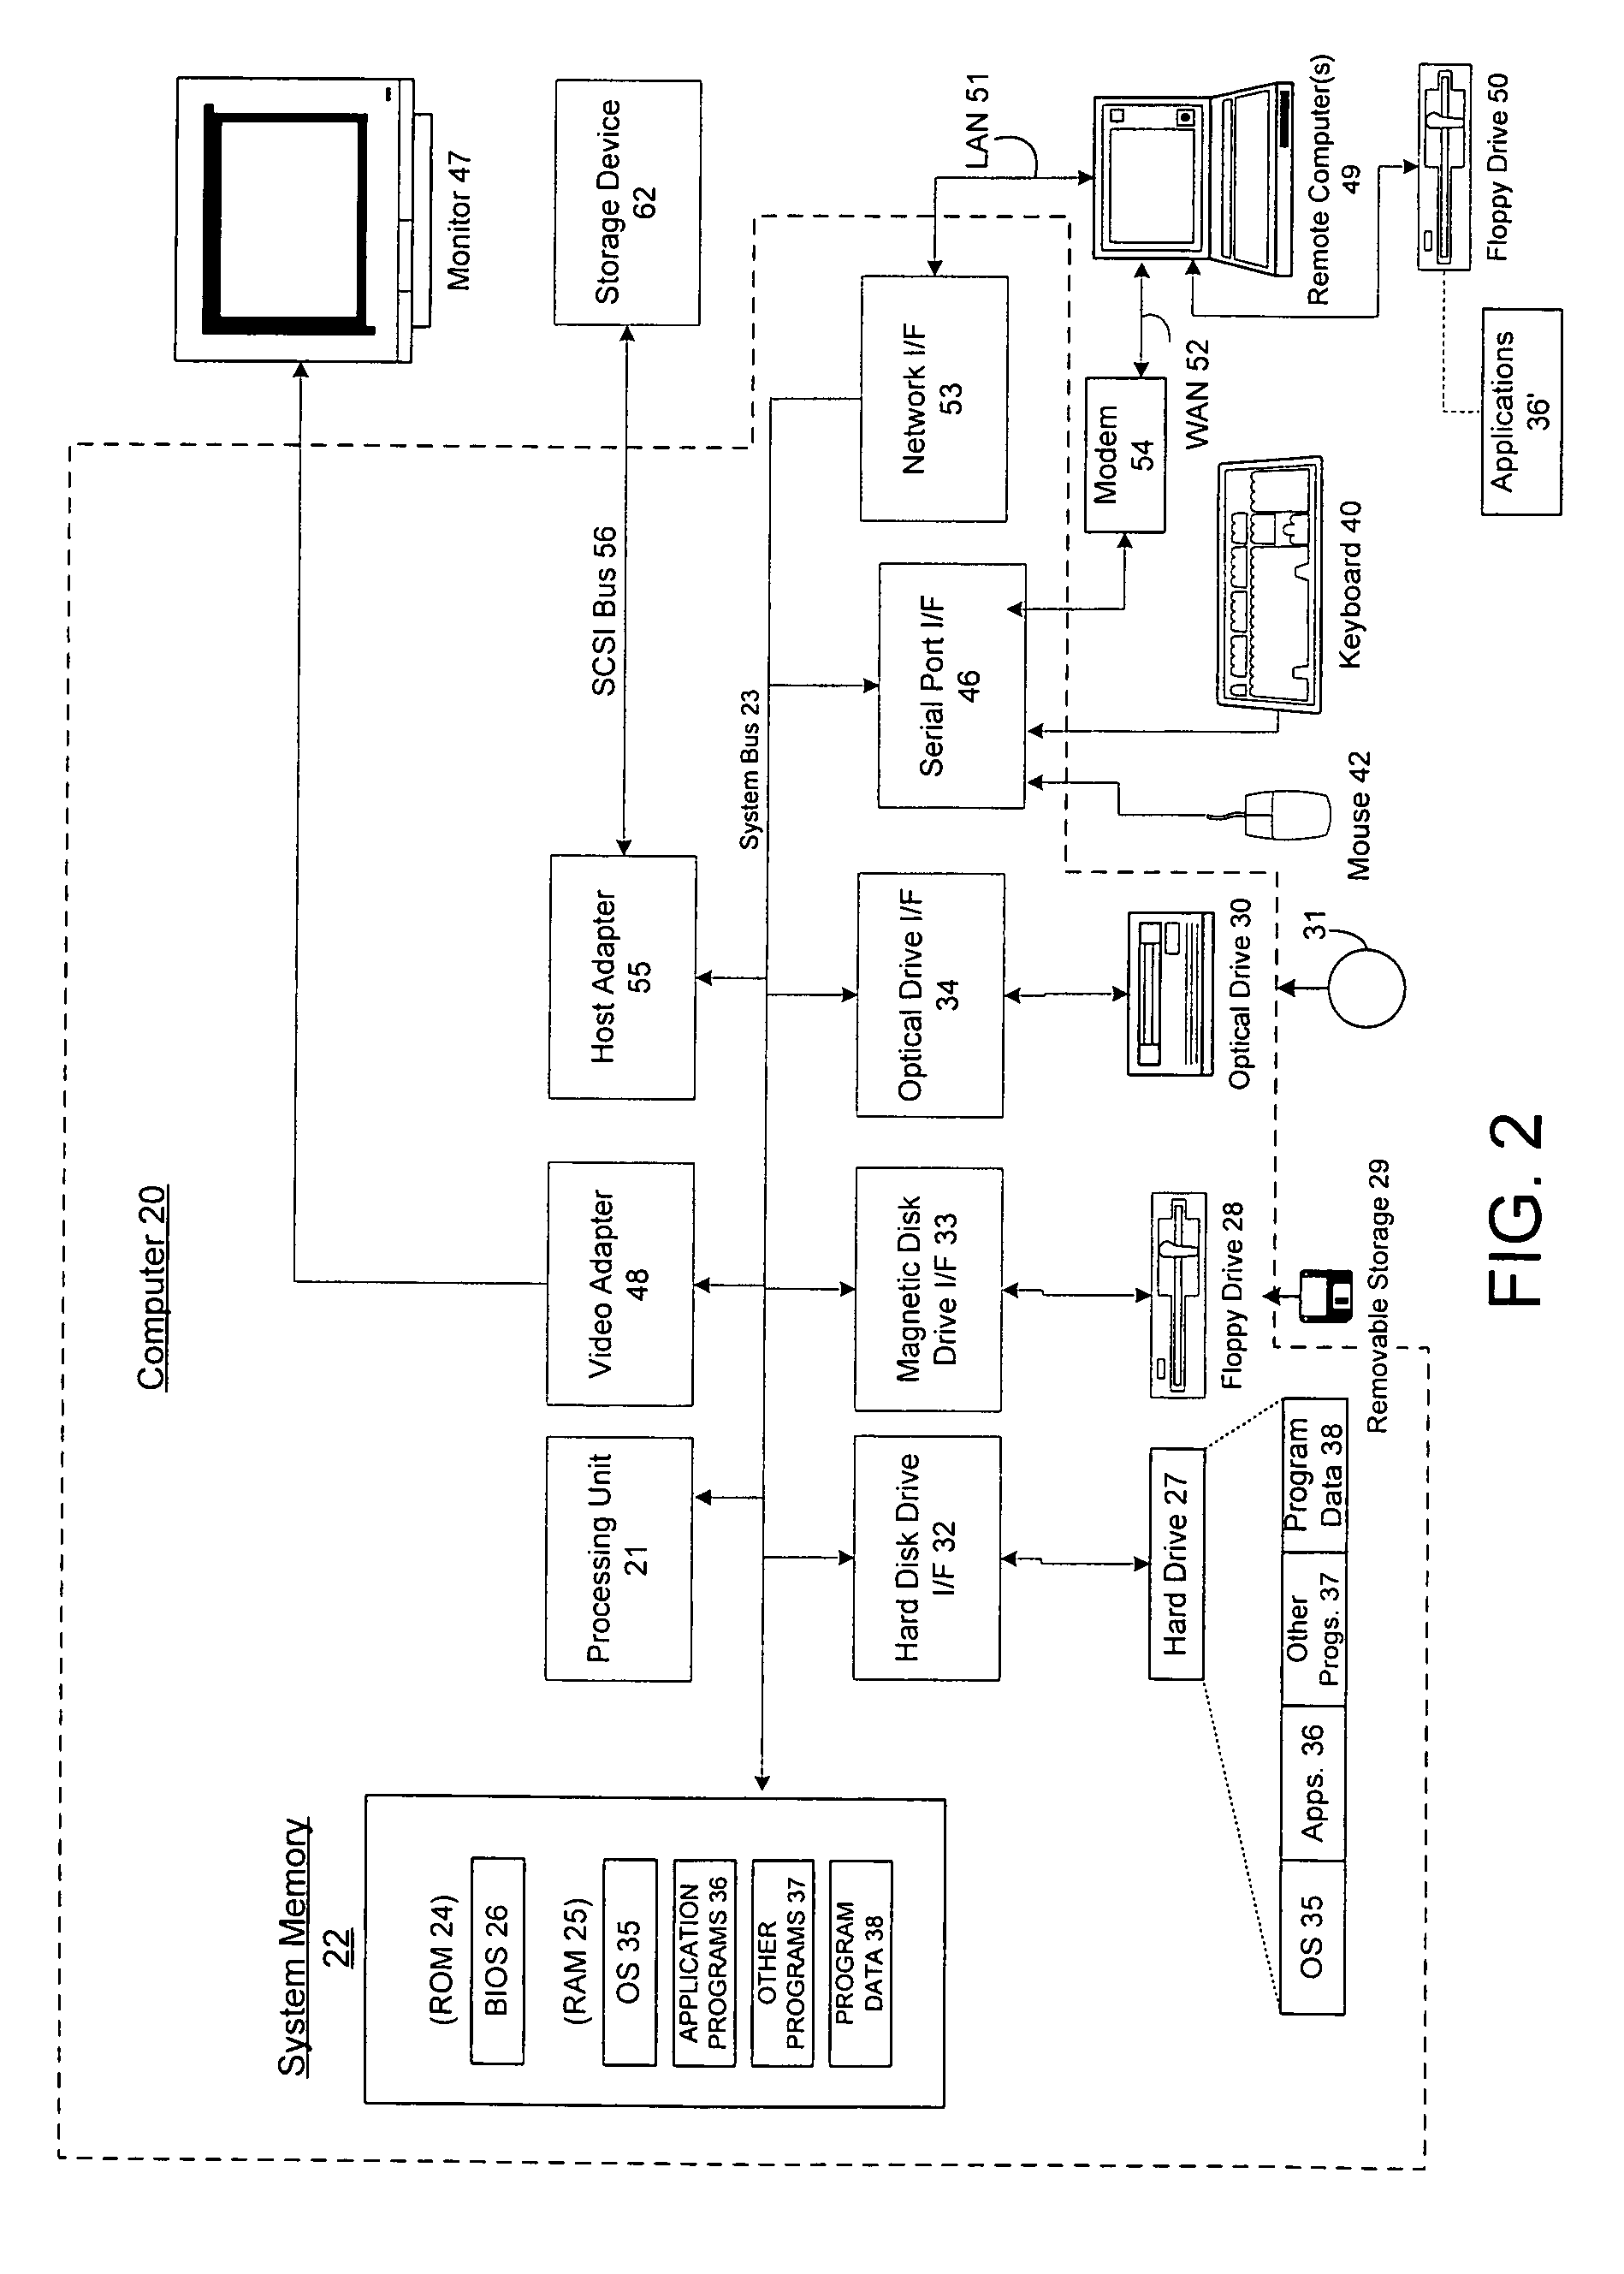 Method and system for limiting the use of user-specific software features